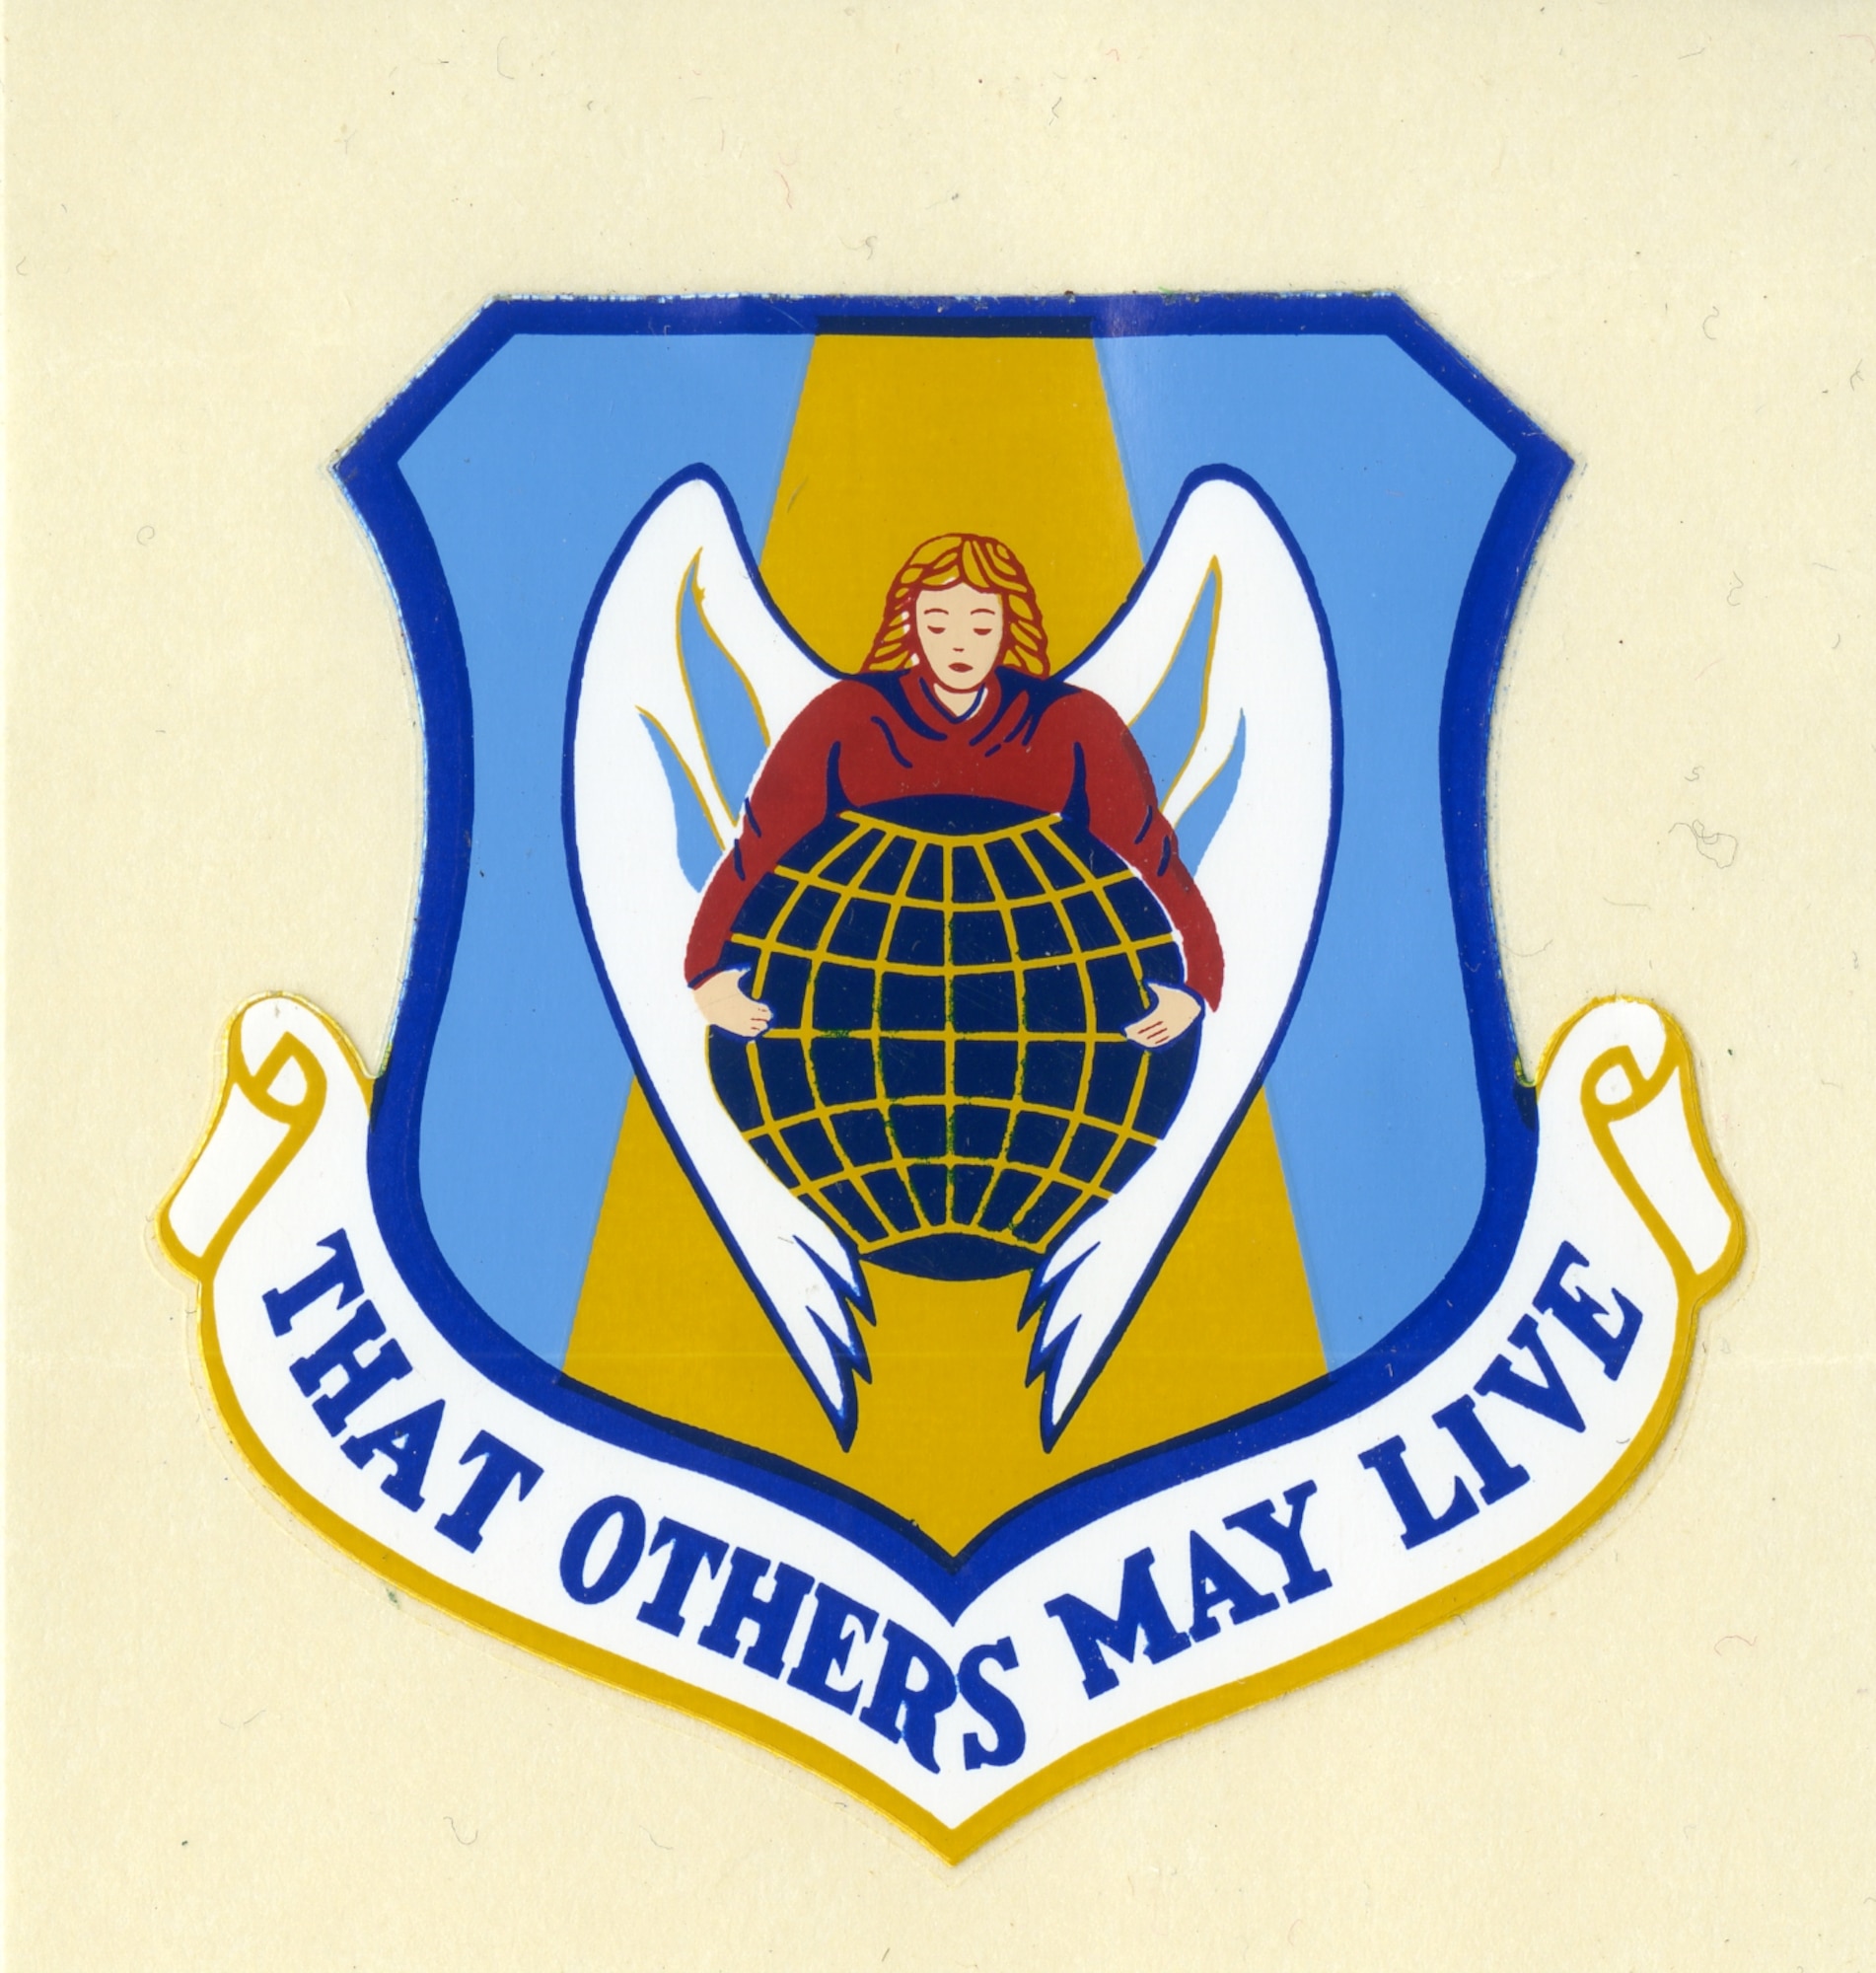 Early Air Rescue Service insignia depicts the unit’s global search and rescue mission.